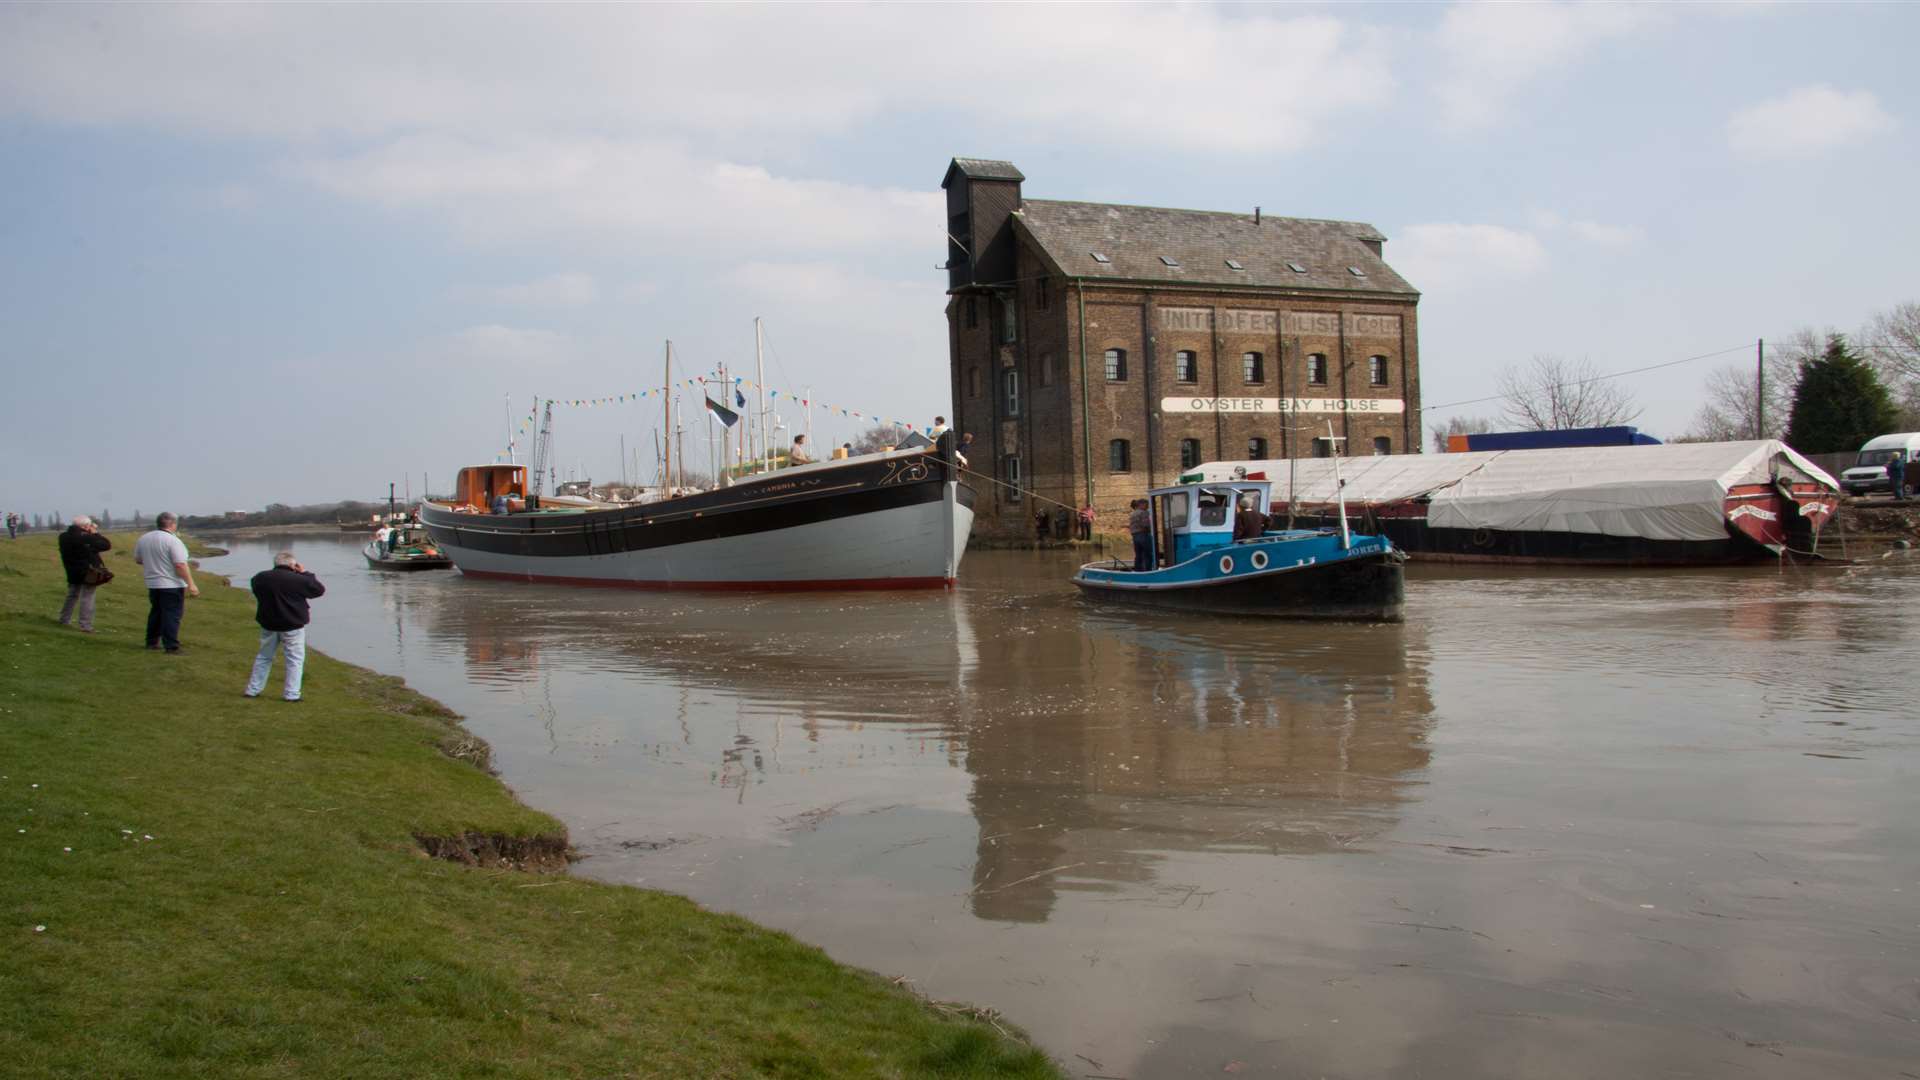 The Cambria was launched at Faversham Creek back in 2011.